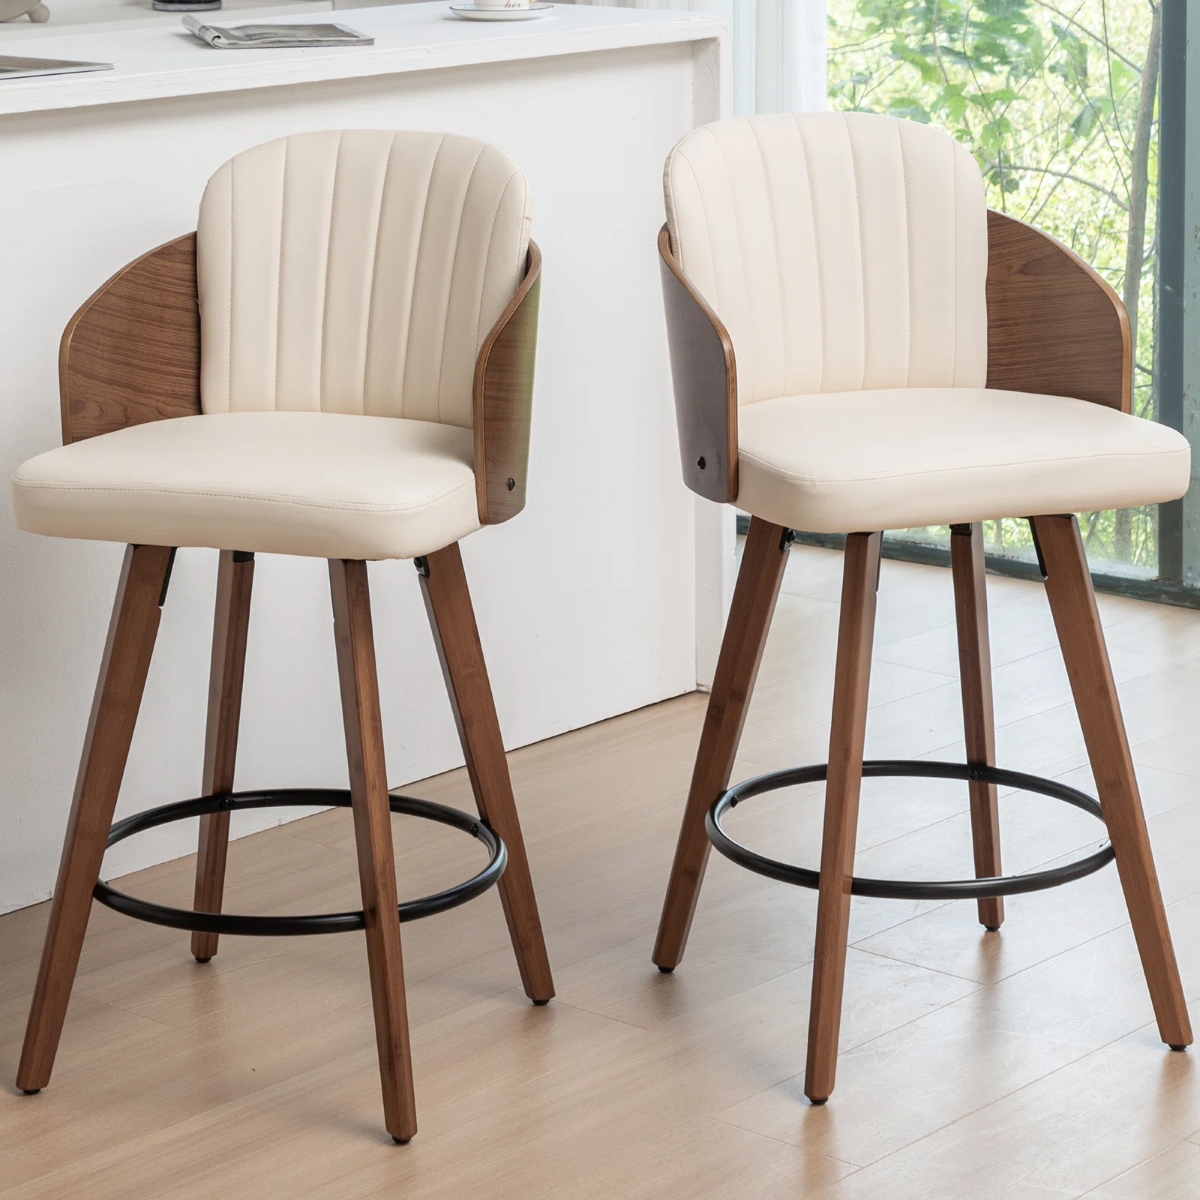 Two white swivel counter stools with wooden frames.